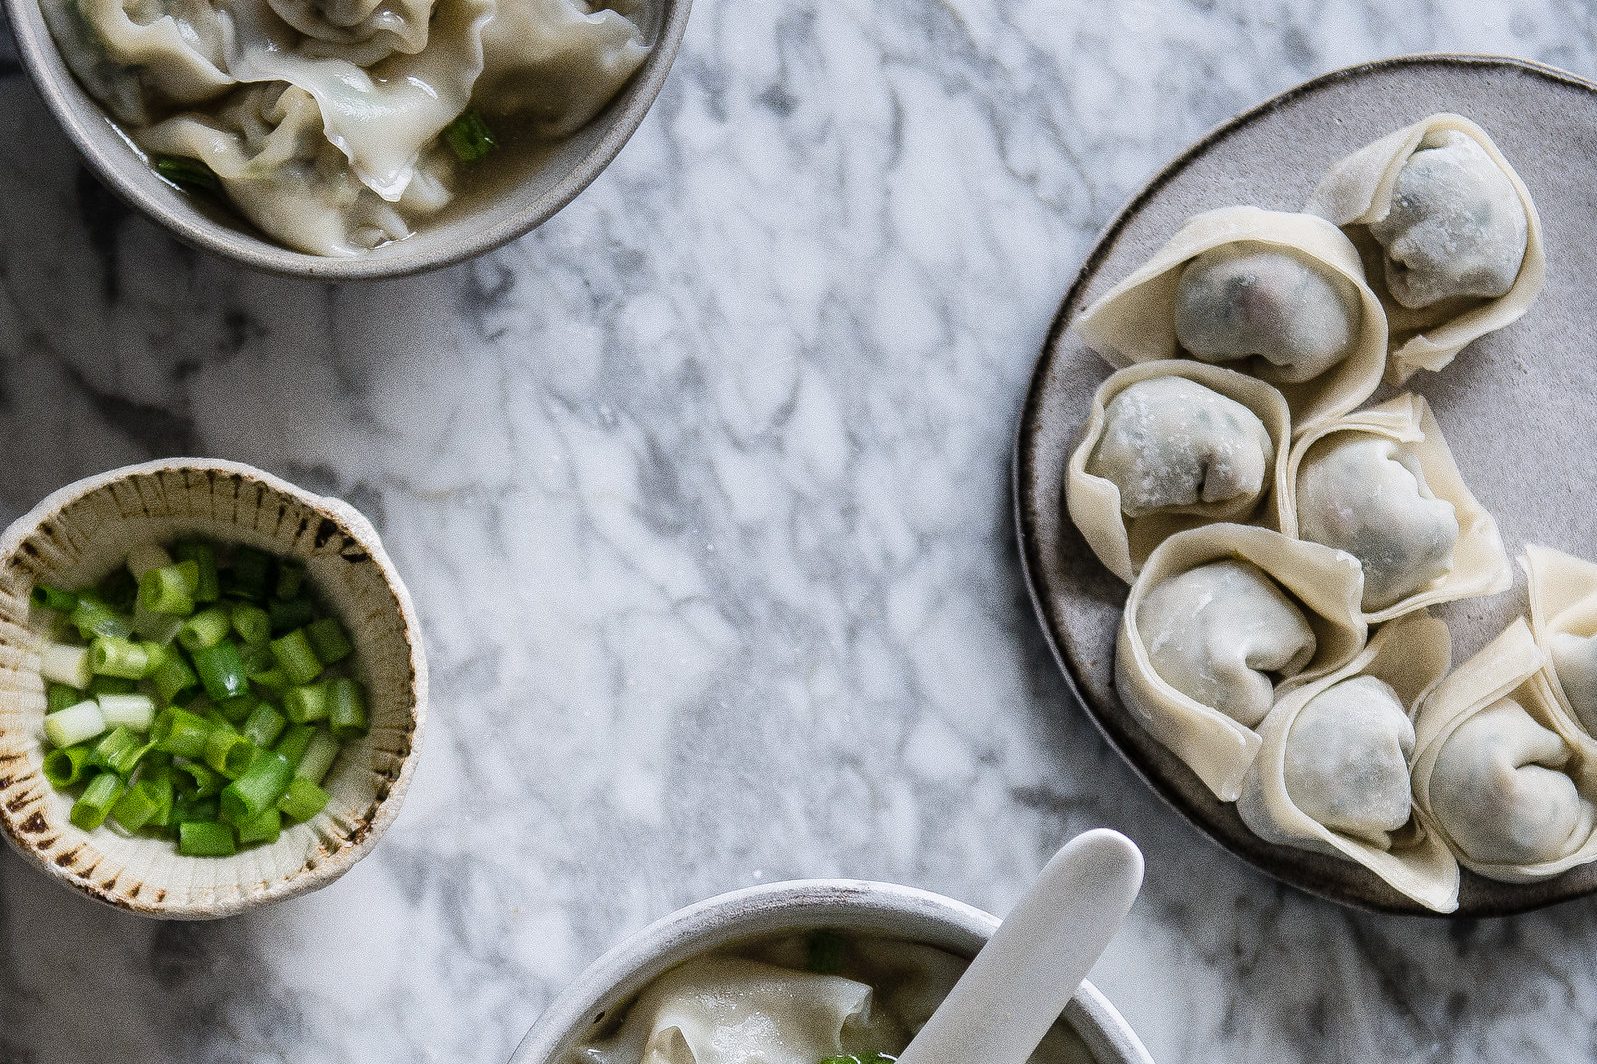 What Is Miso Paste and How To Use Them? A Must-have Secret Ingredient In  Your Pantry » Joyful Dumplings